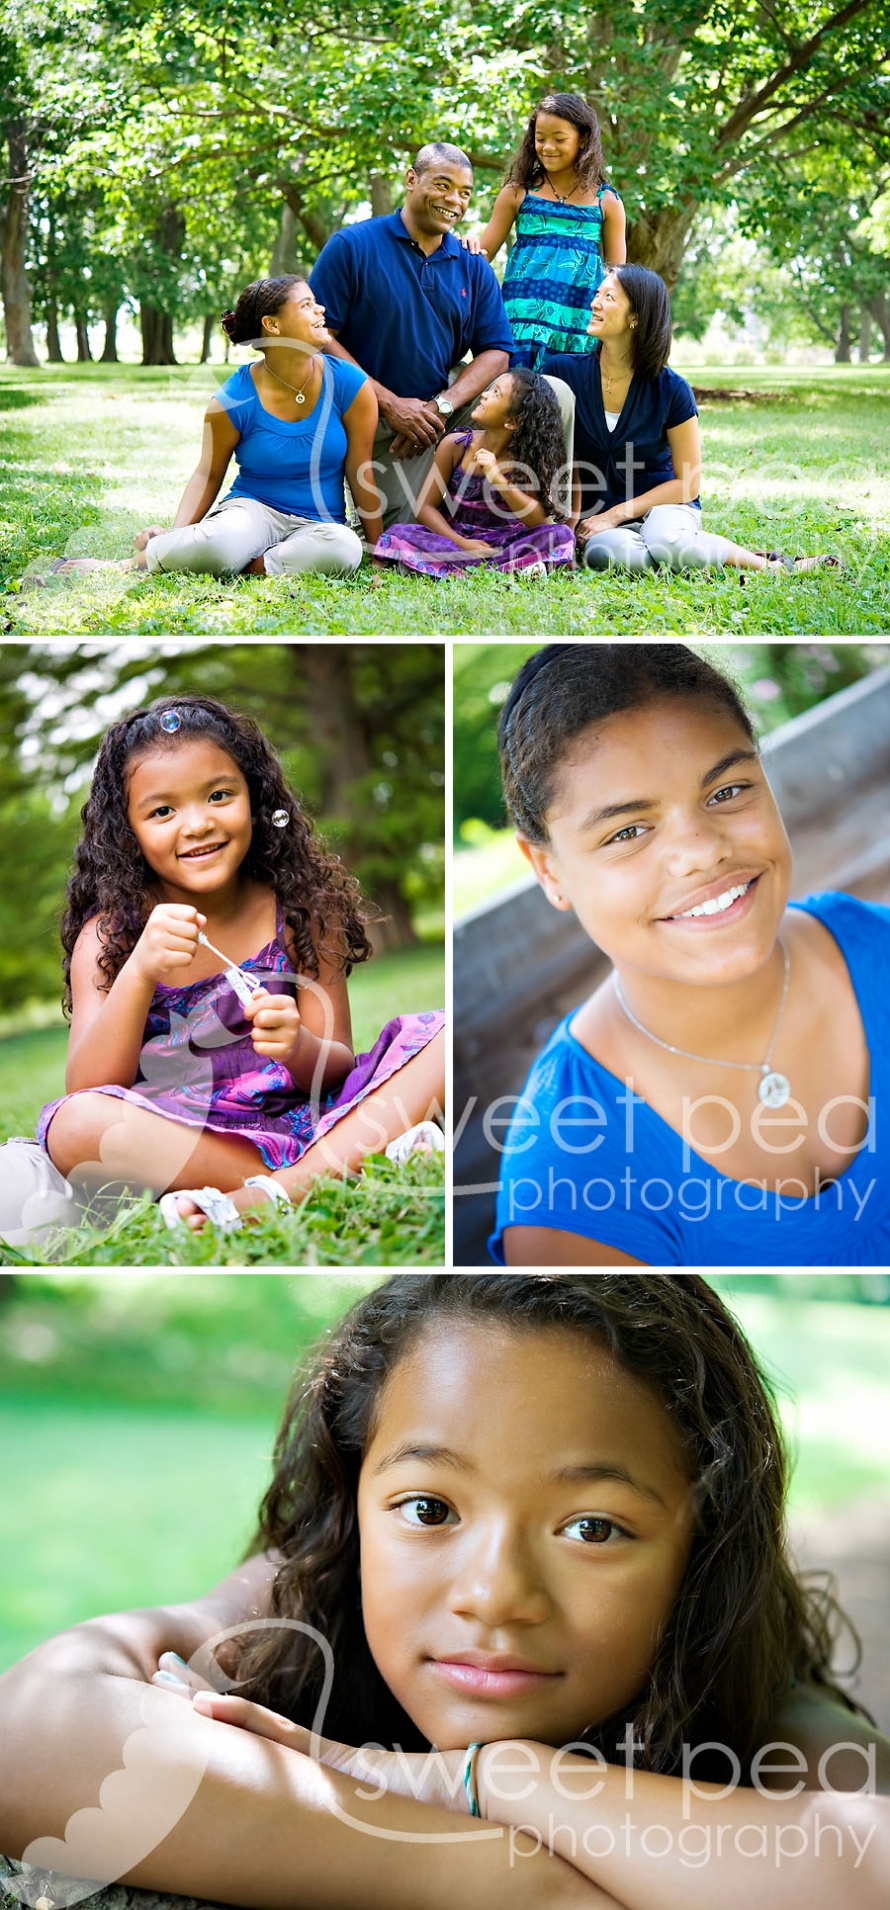 champaign_family_photographer082810